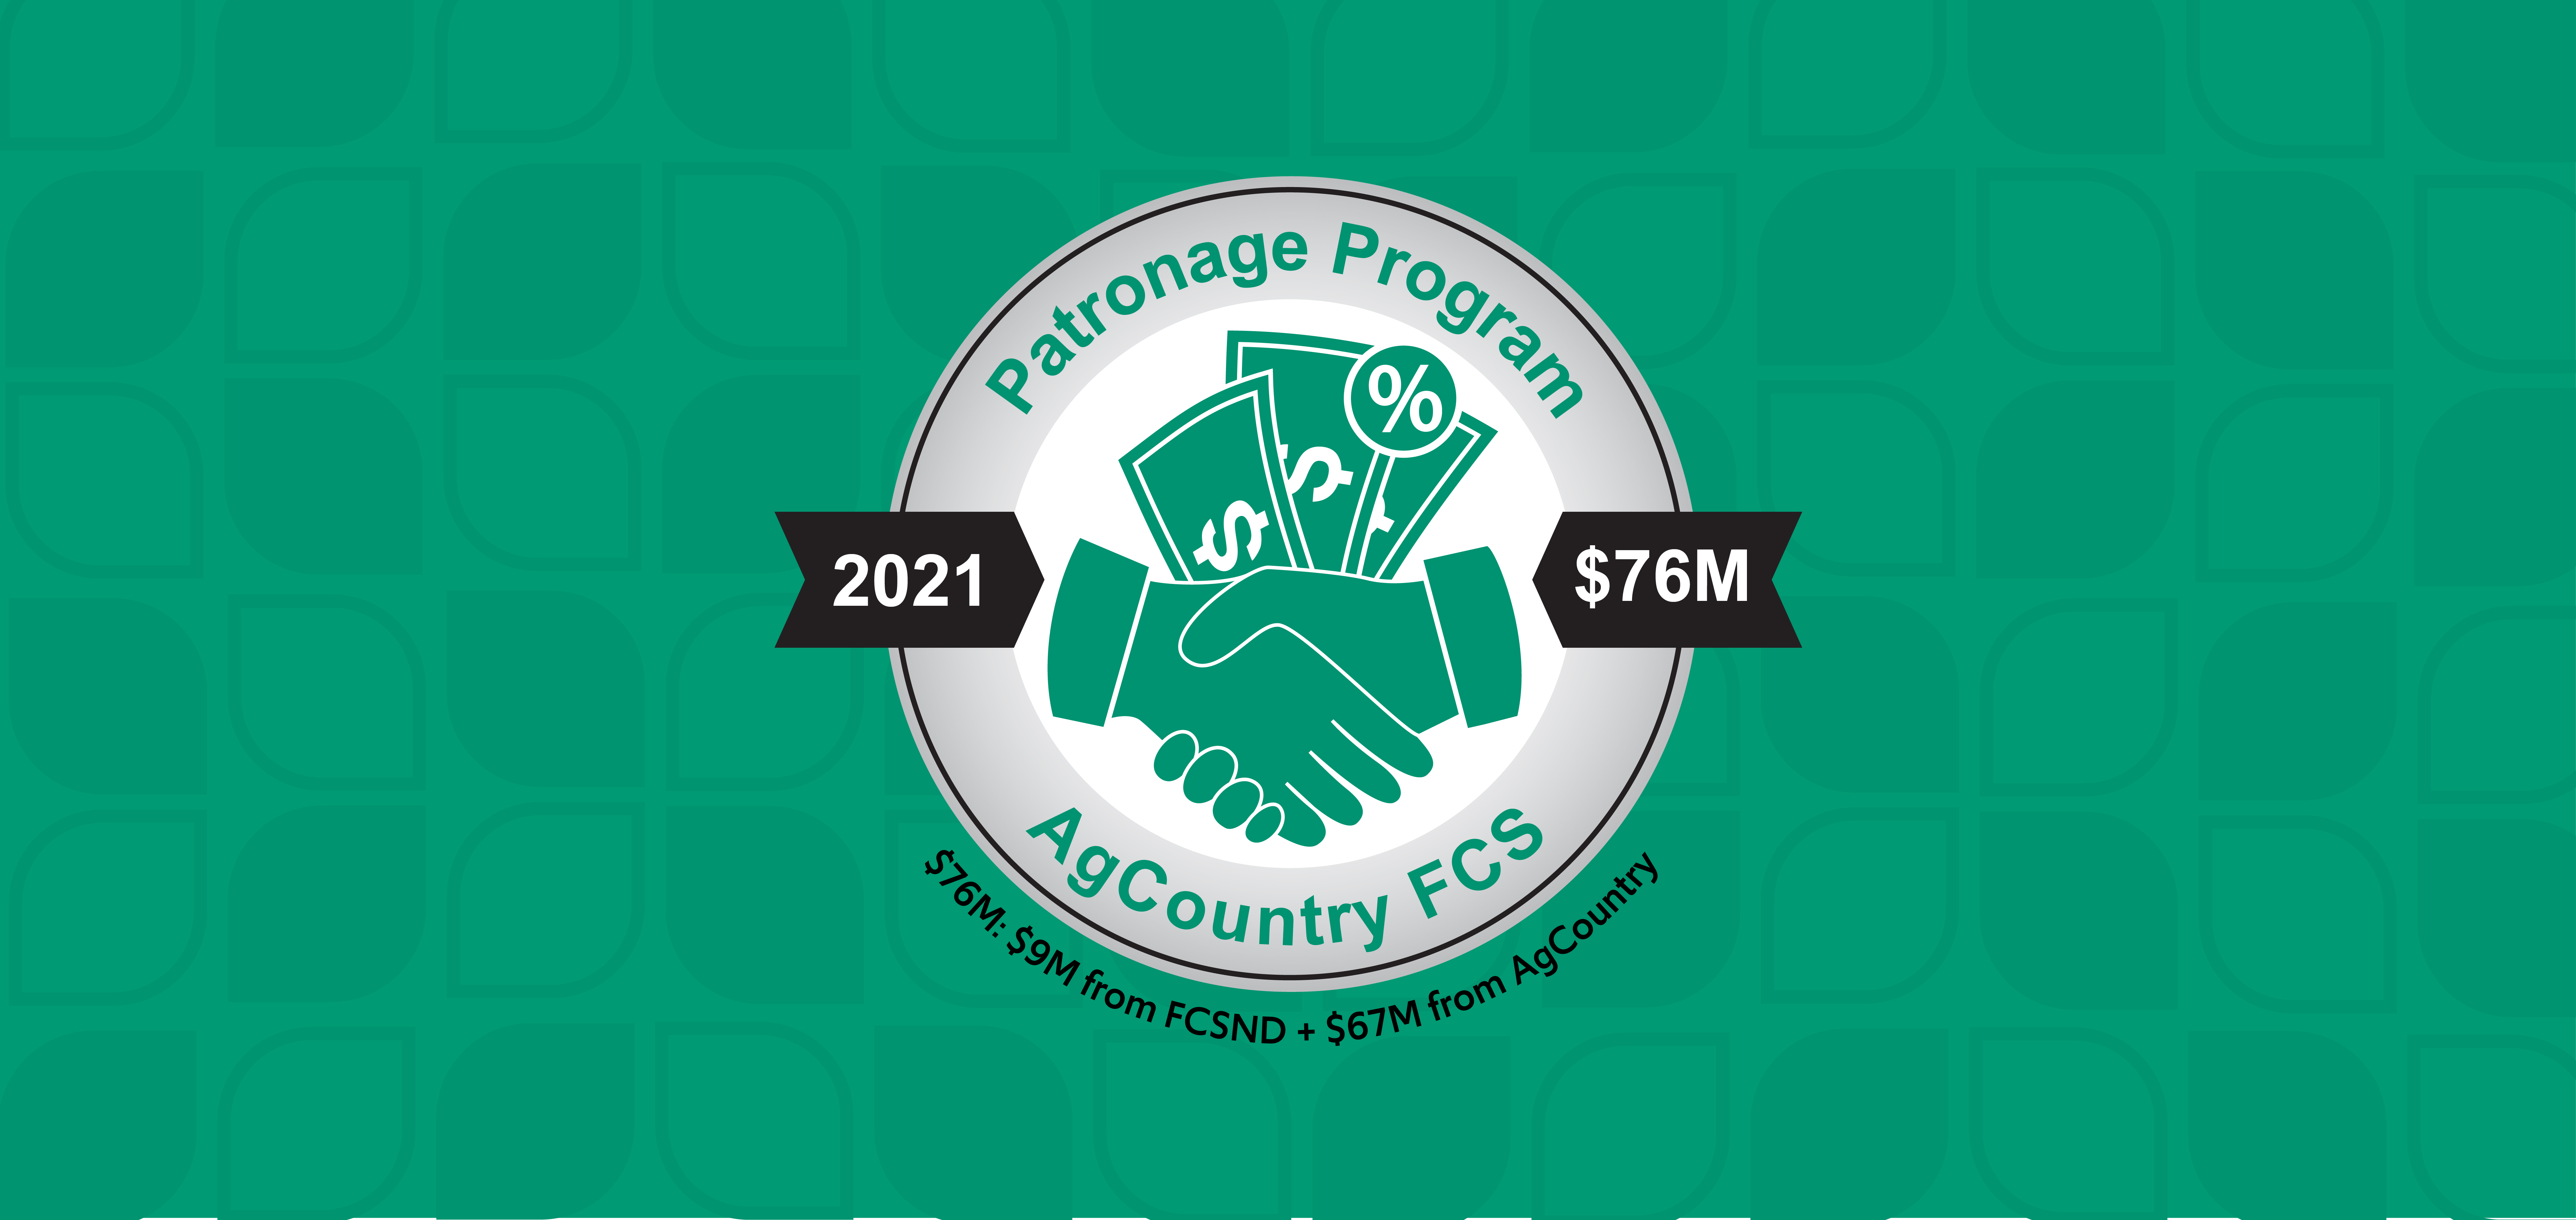 AgCountry's patronage logo announcing a $76 million dividend 